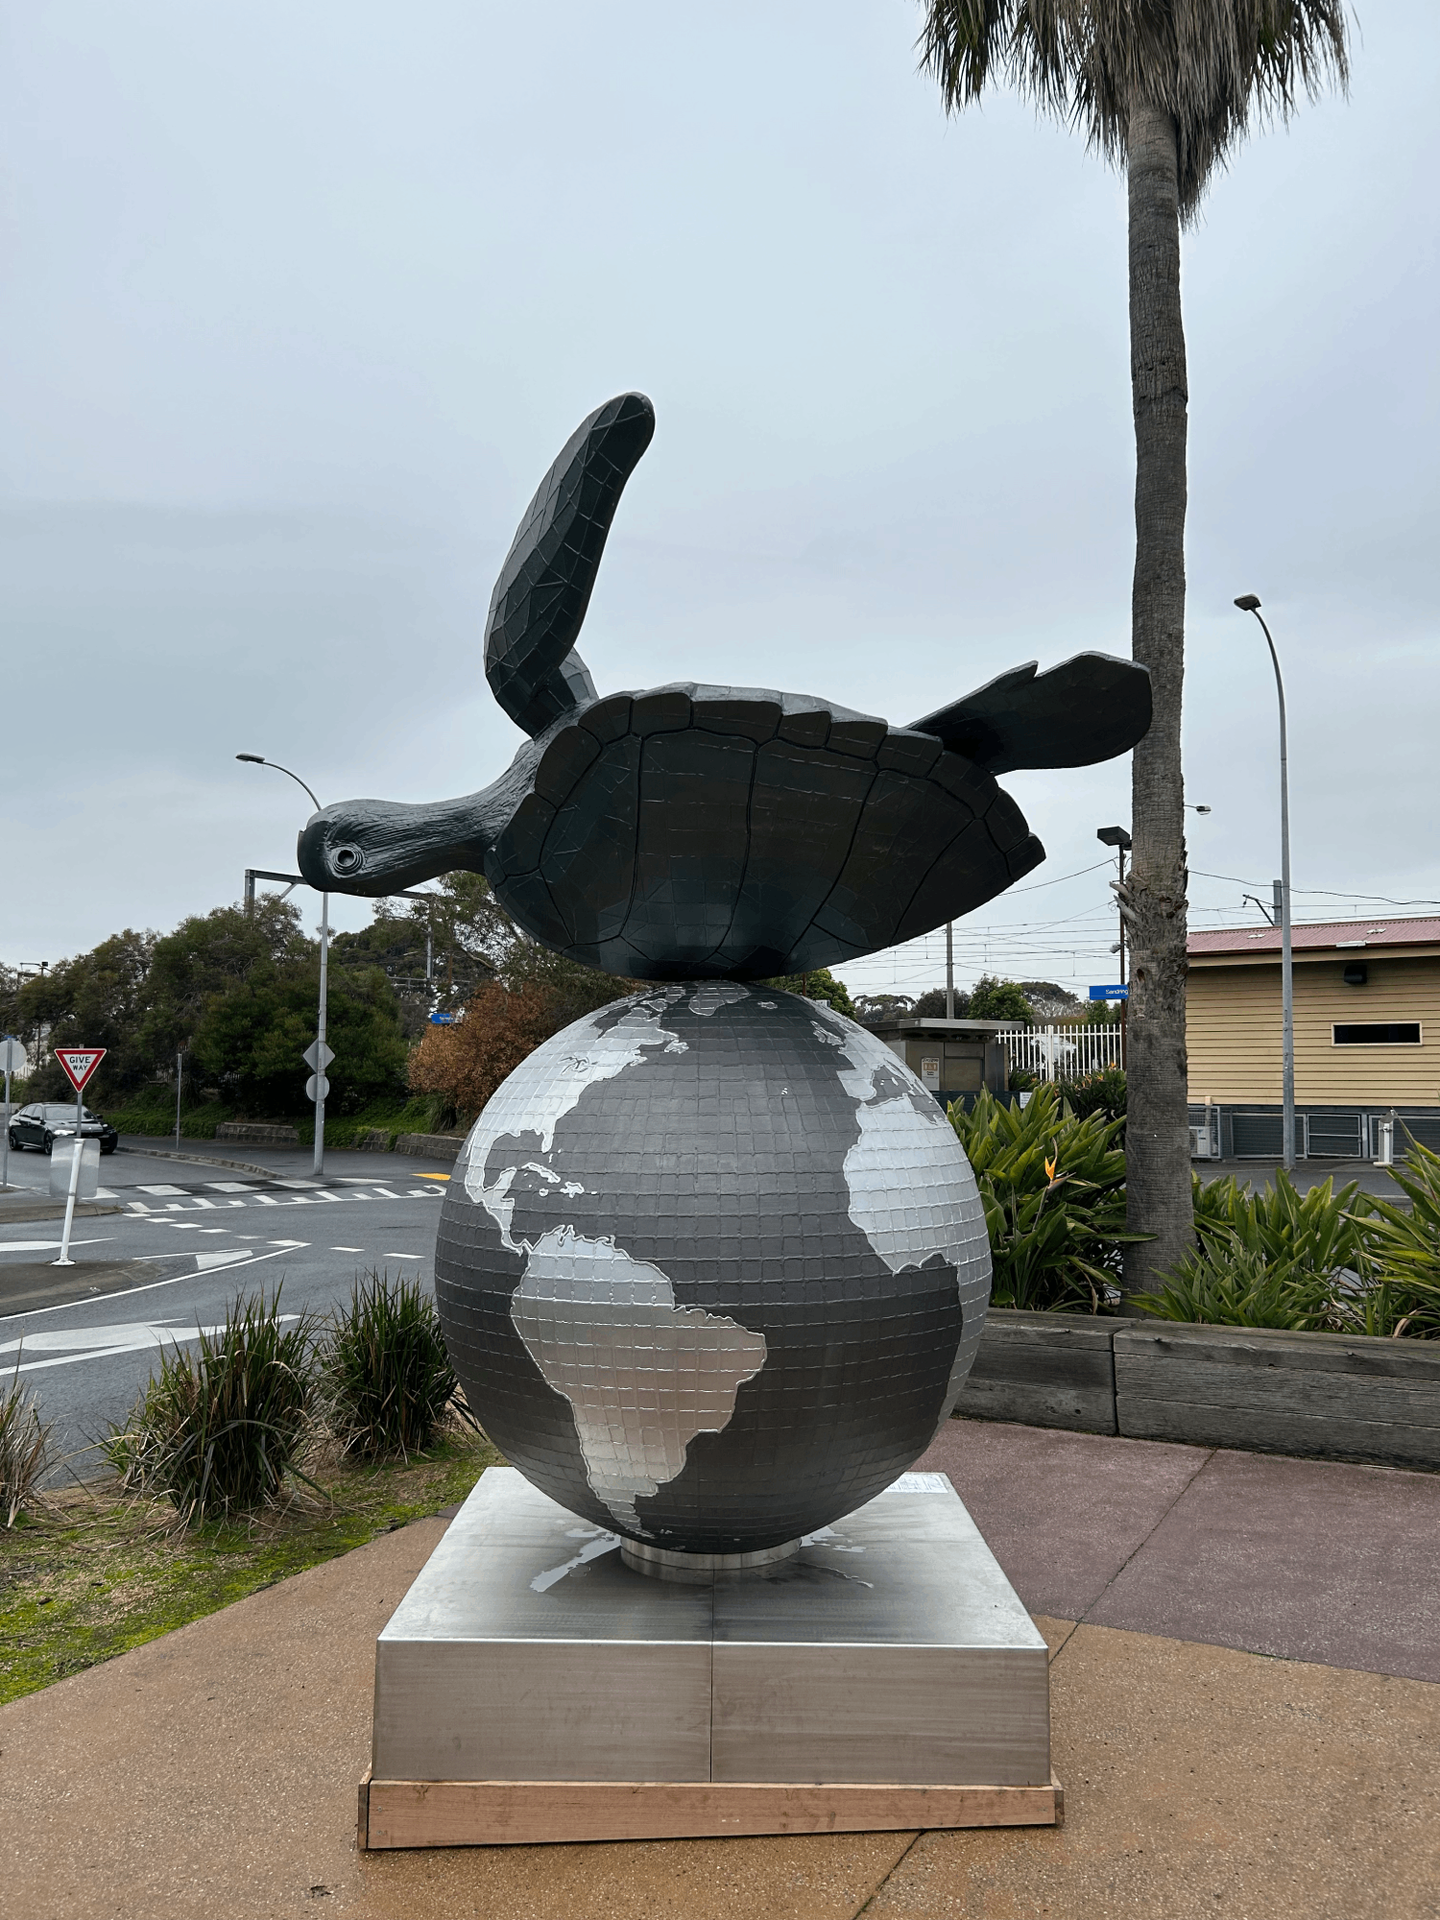 Sculpture of turtle on its back on top of globe